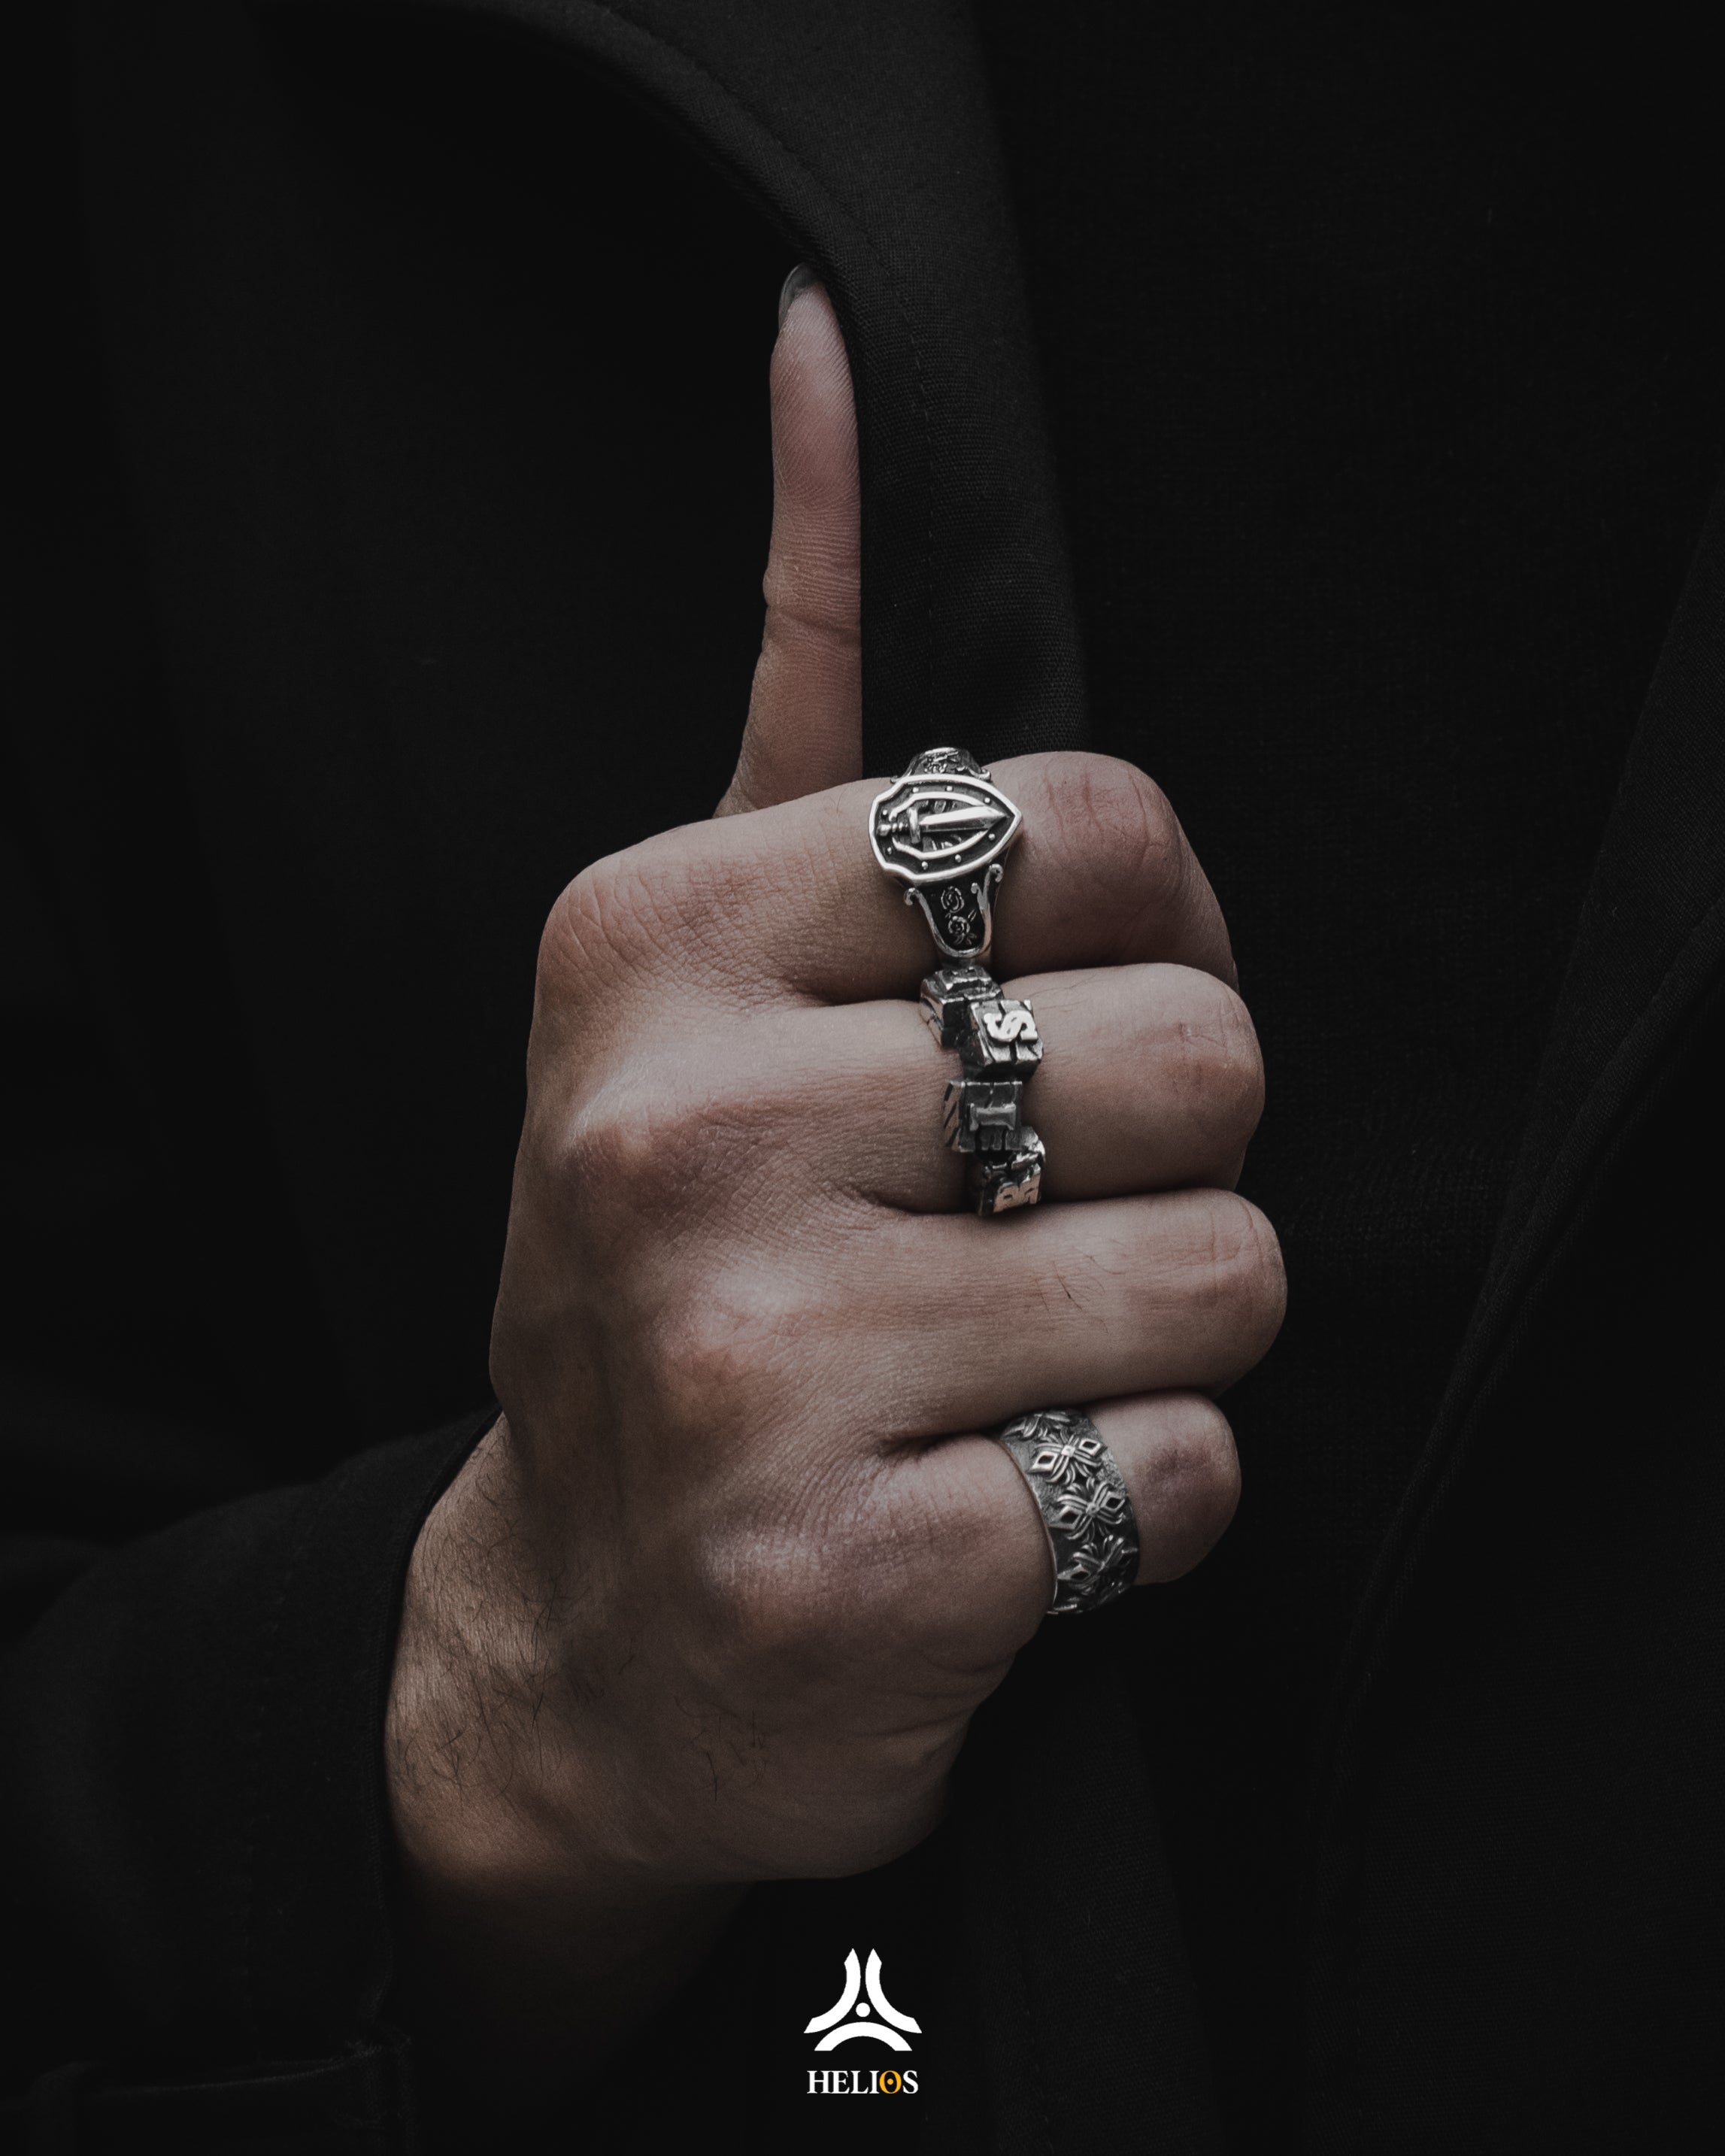 Stylish Silver Men's Rings You Should Consider Buying for Your Loved One This Christmas